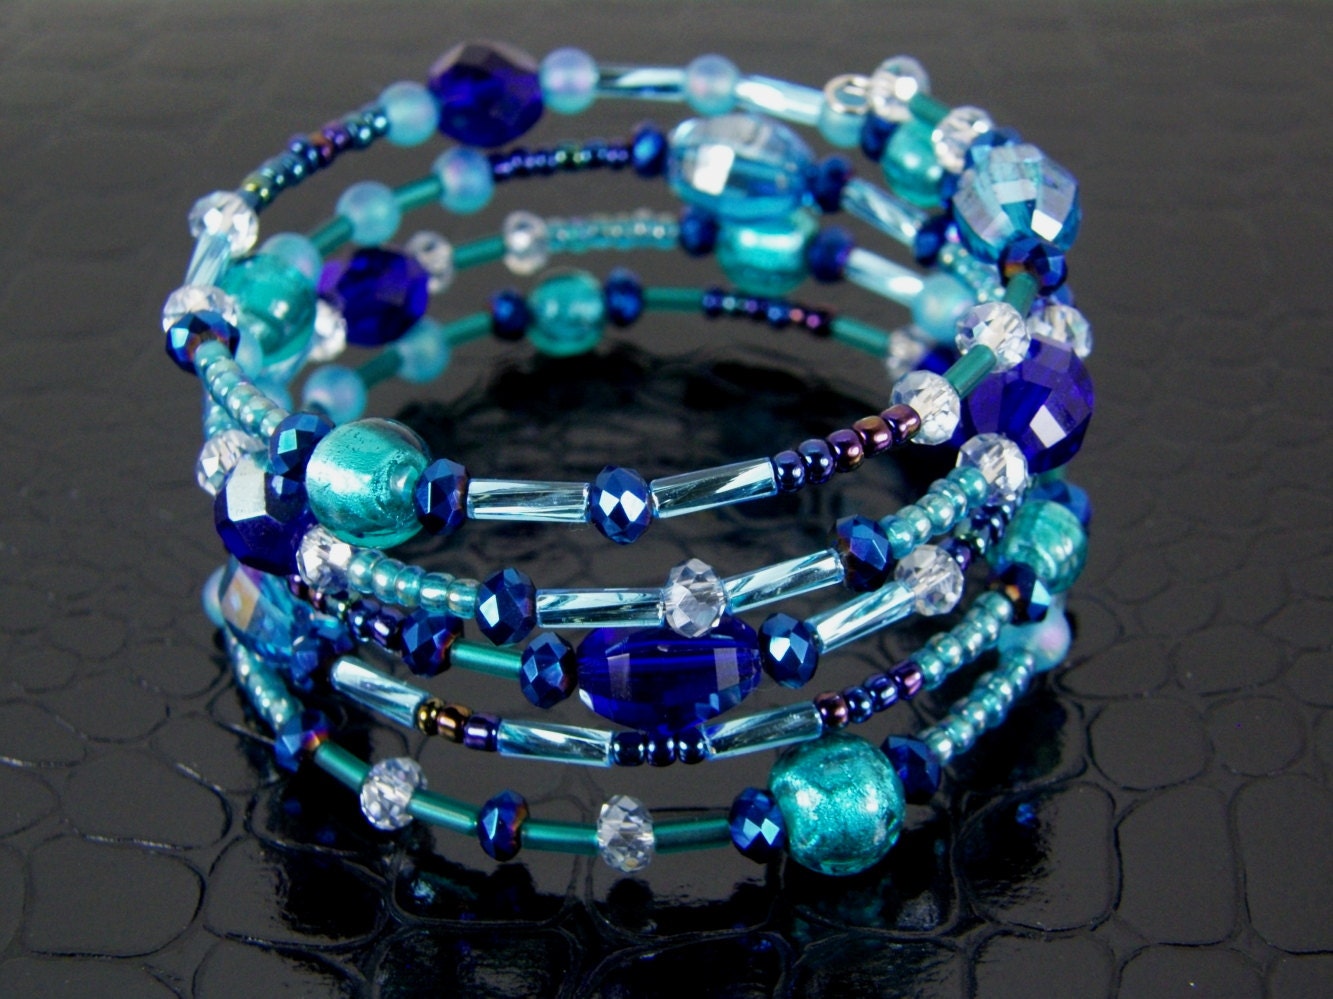 Blue Memory Wire Bracelet for Women Crystal Blue Cuff is Hand Made